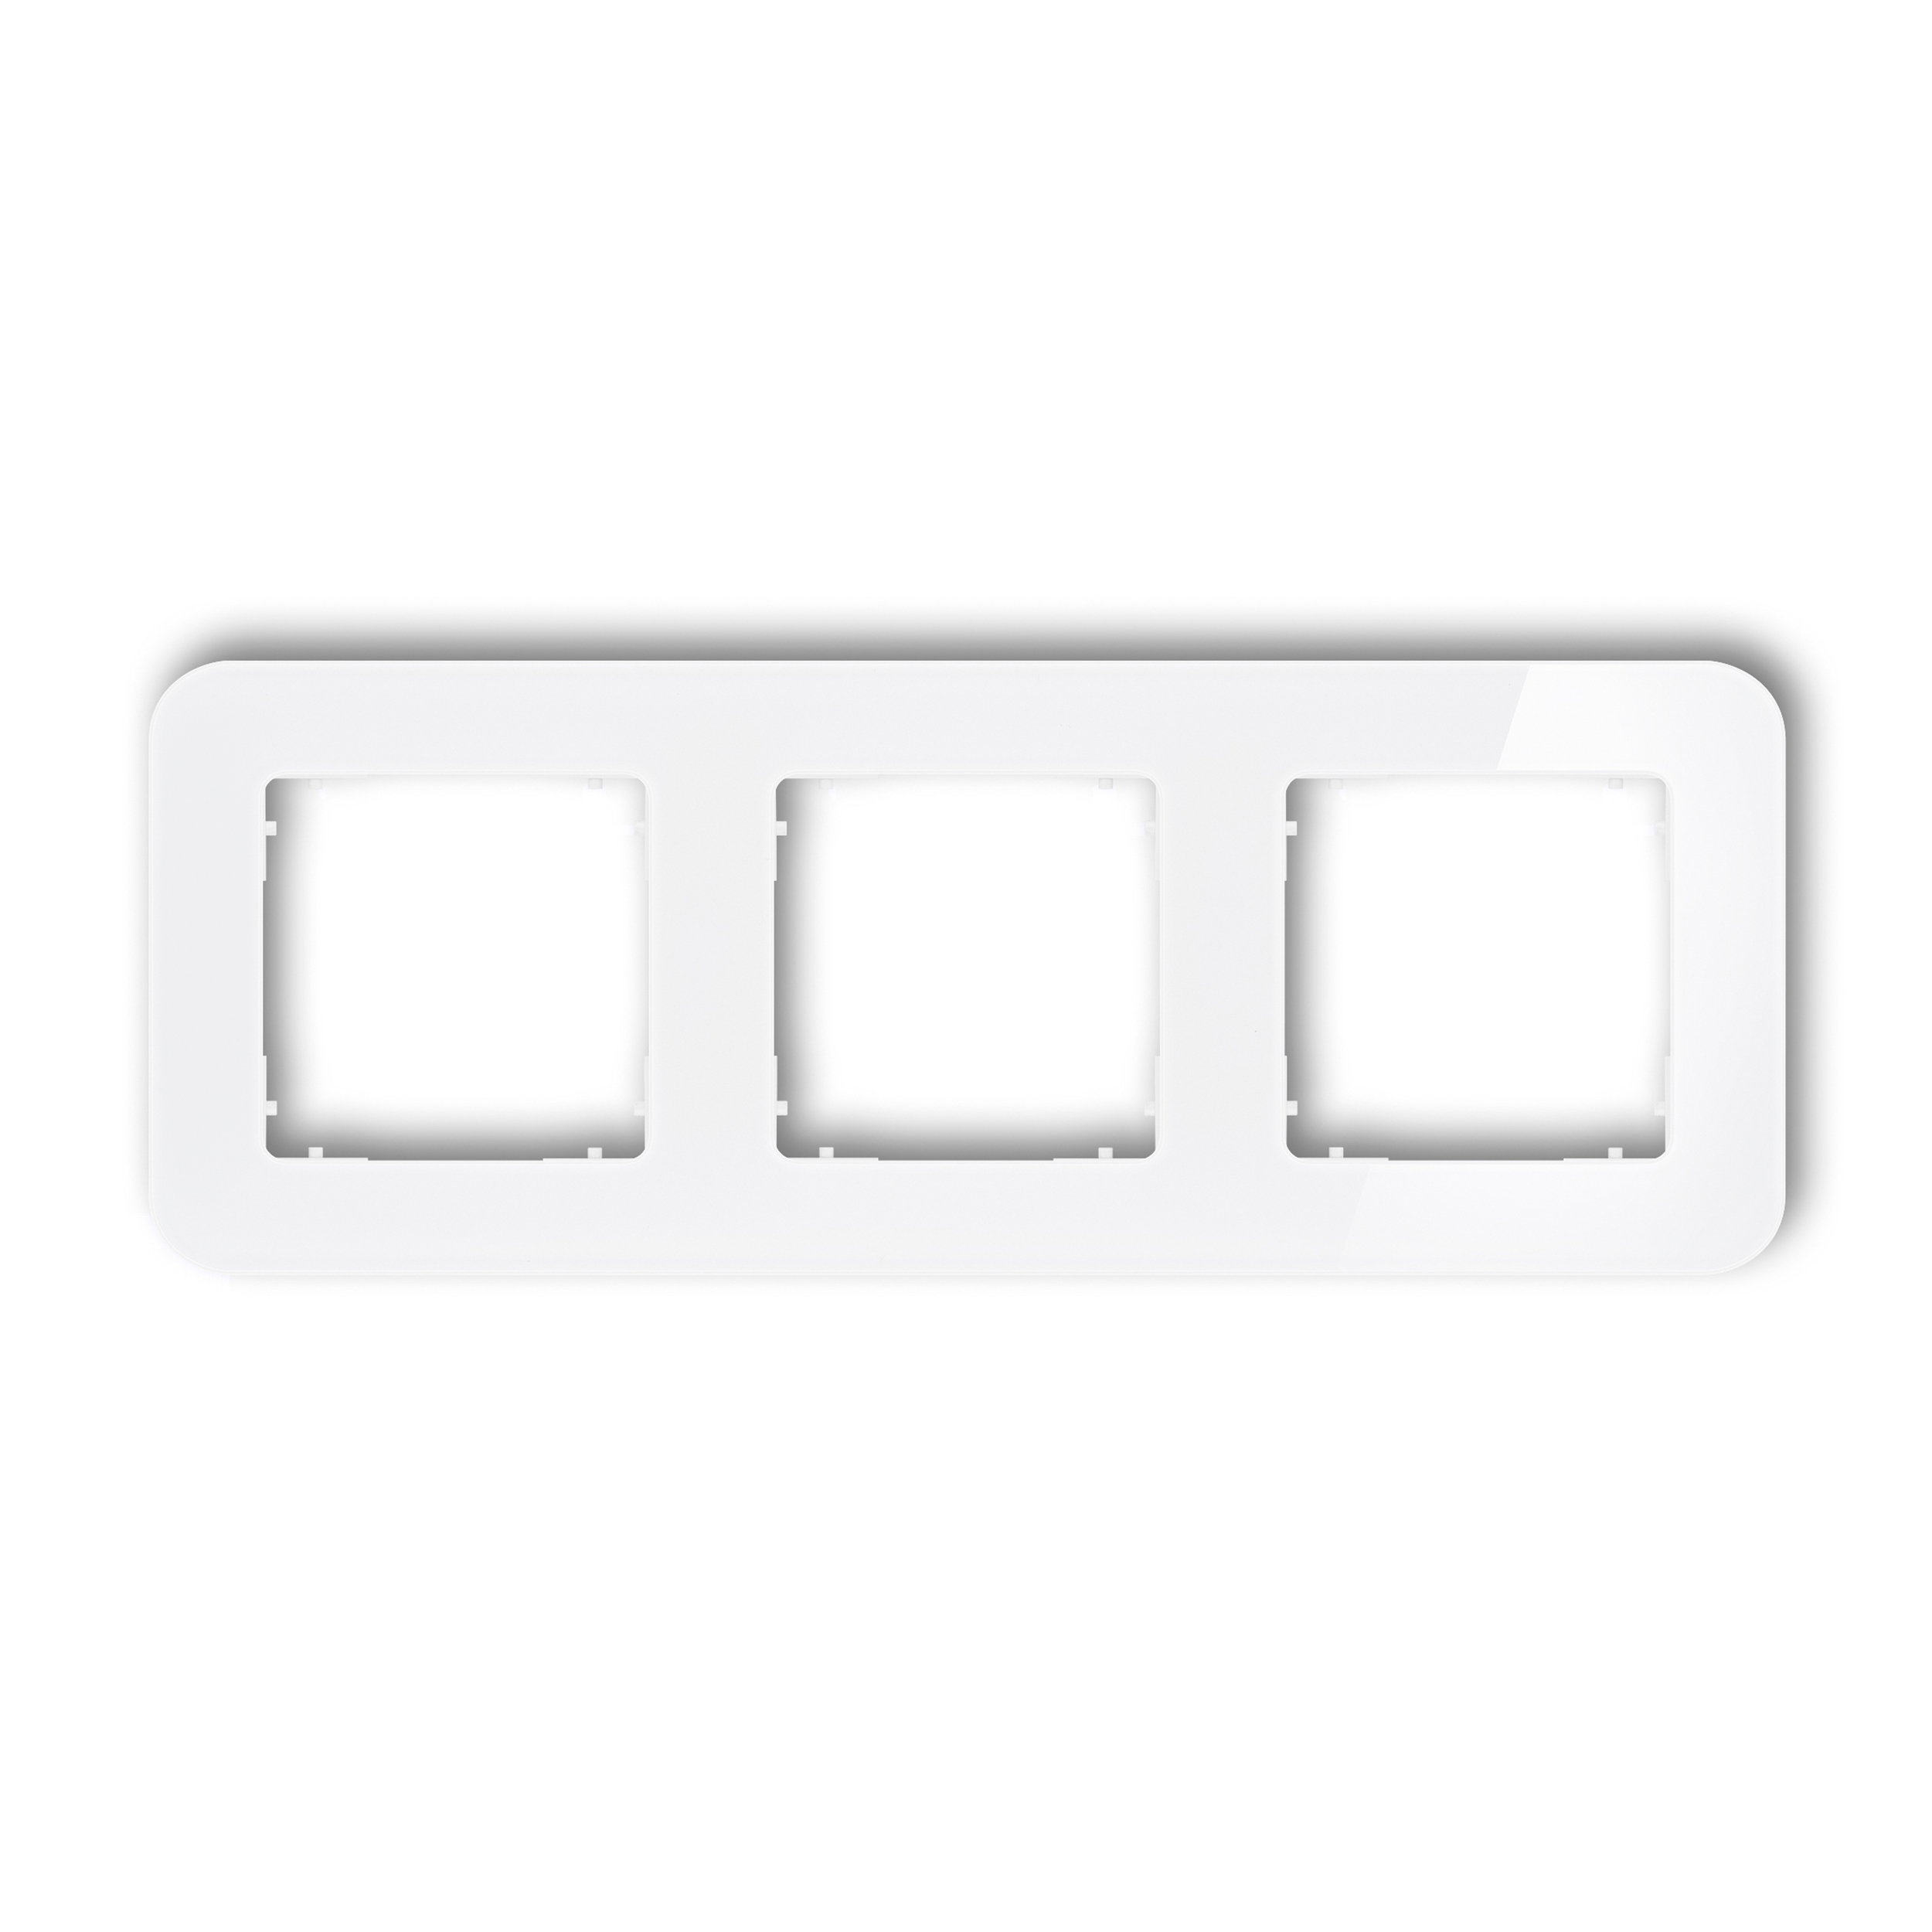 3-gang universal frame with rounded edges - glass effect